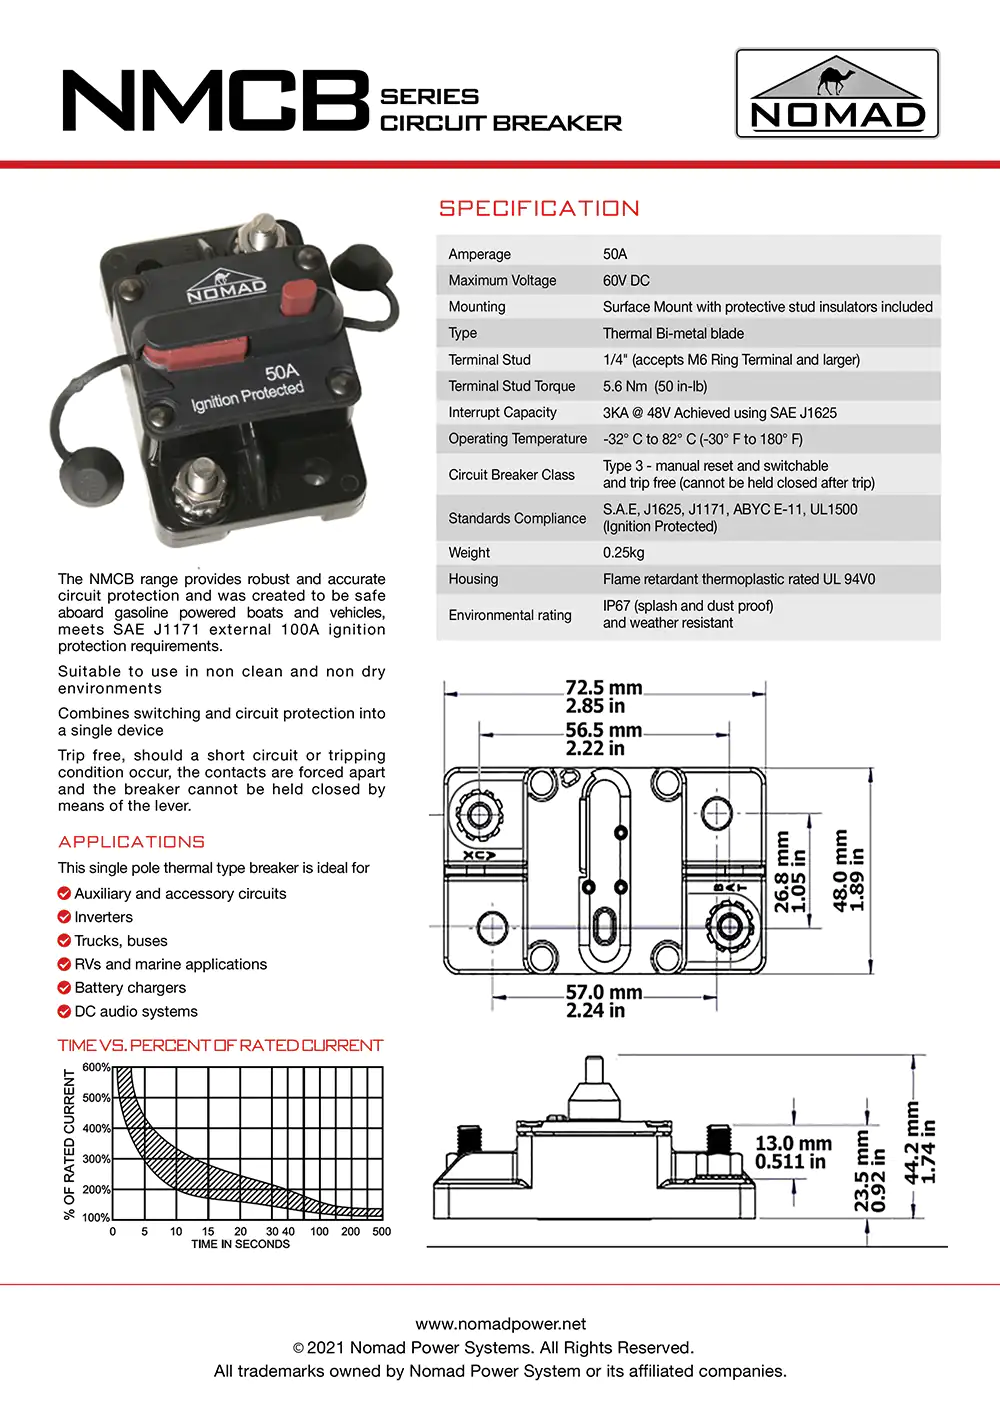 NOMAD 50A DC CIRCUIT BREAKER NMCB SPECIFICATION SHEET